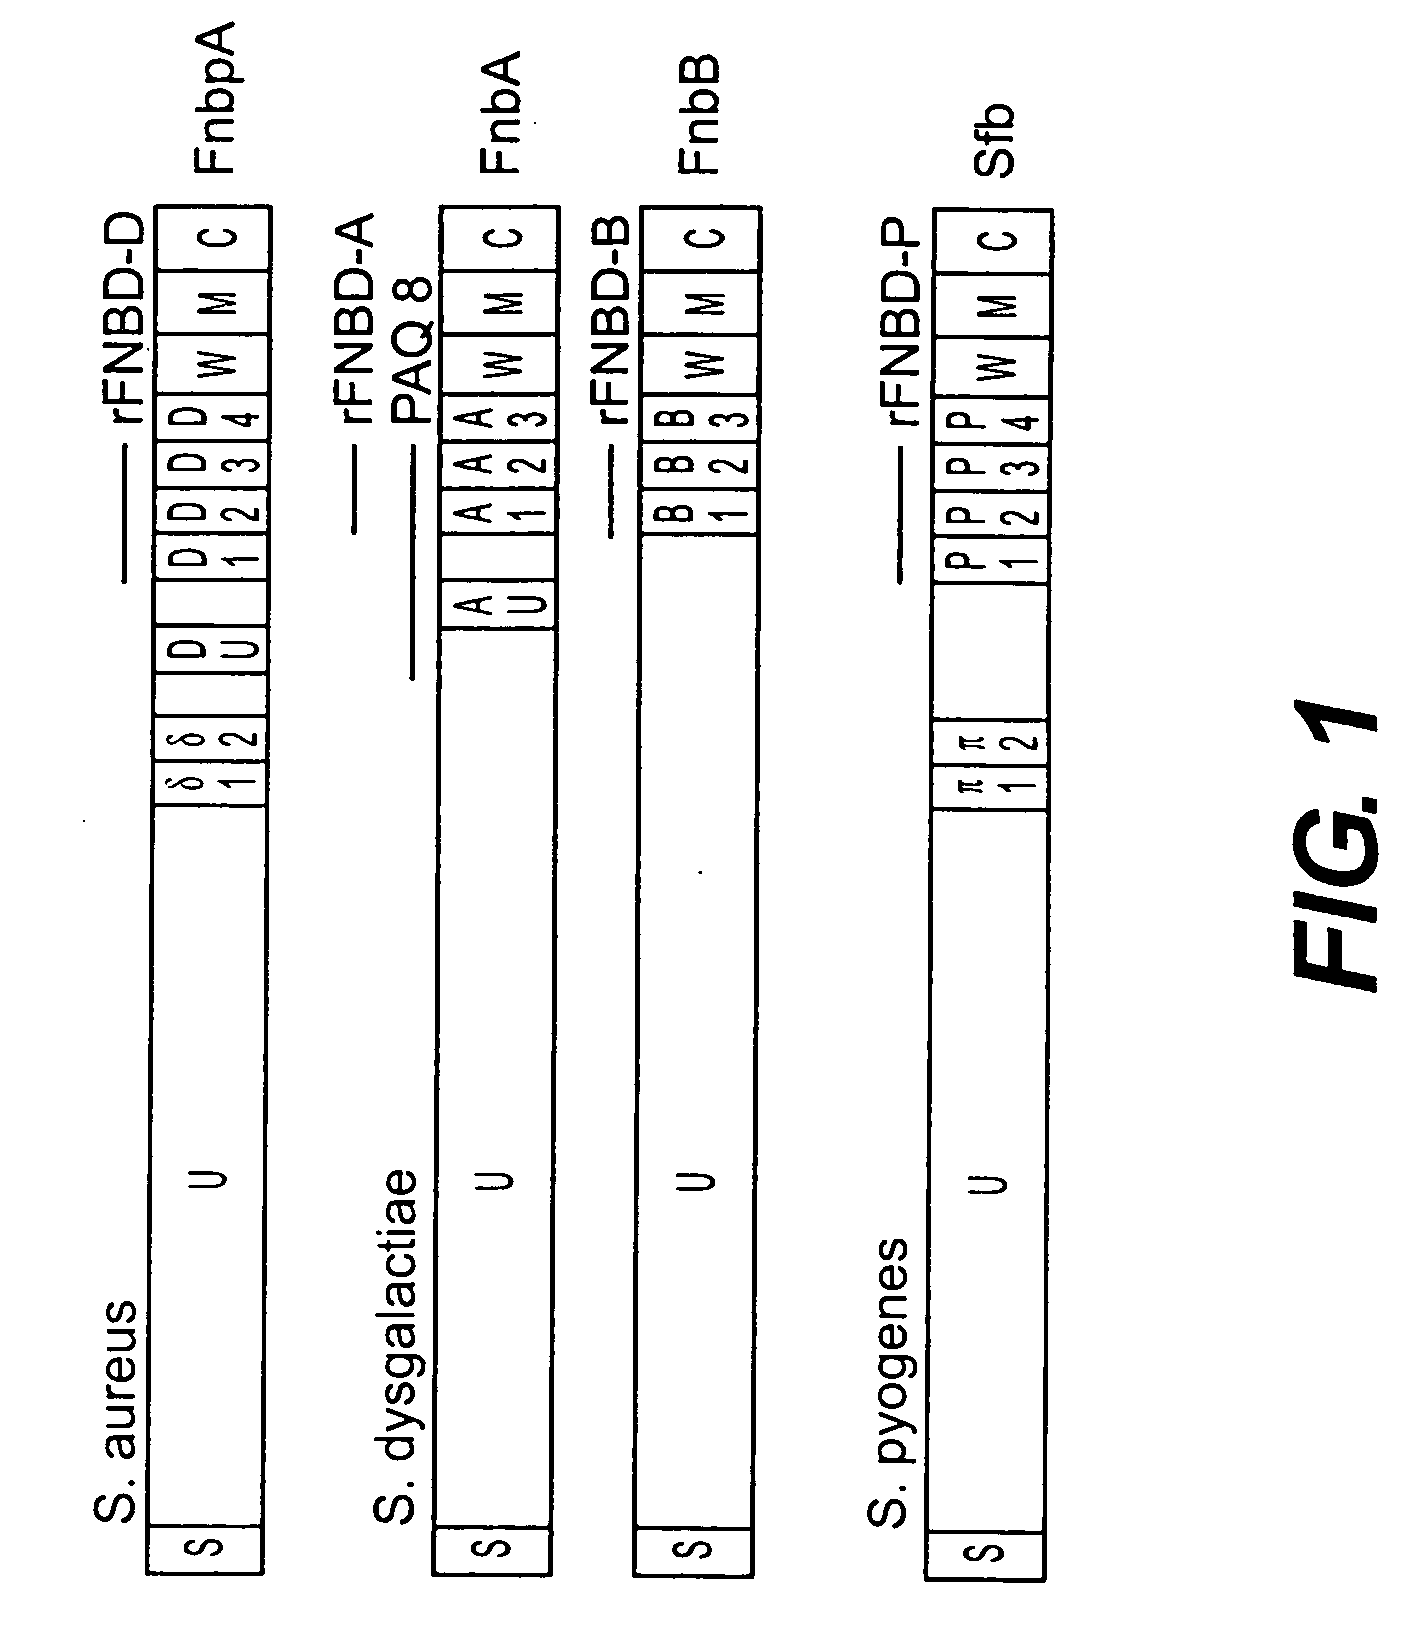 Fibronectin binding protein compositions and methods of use